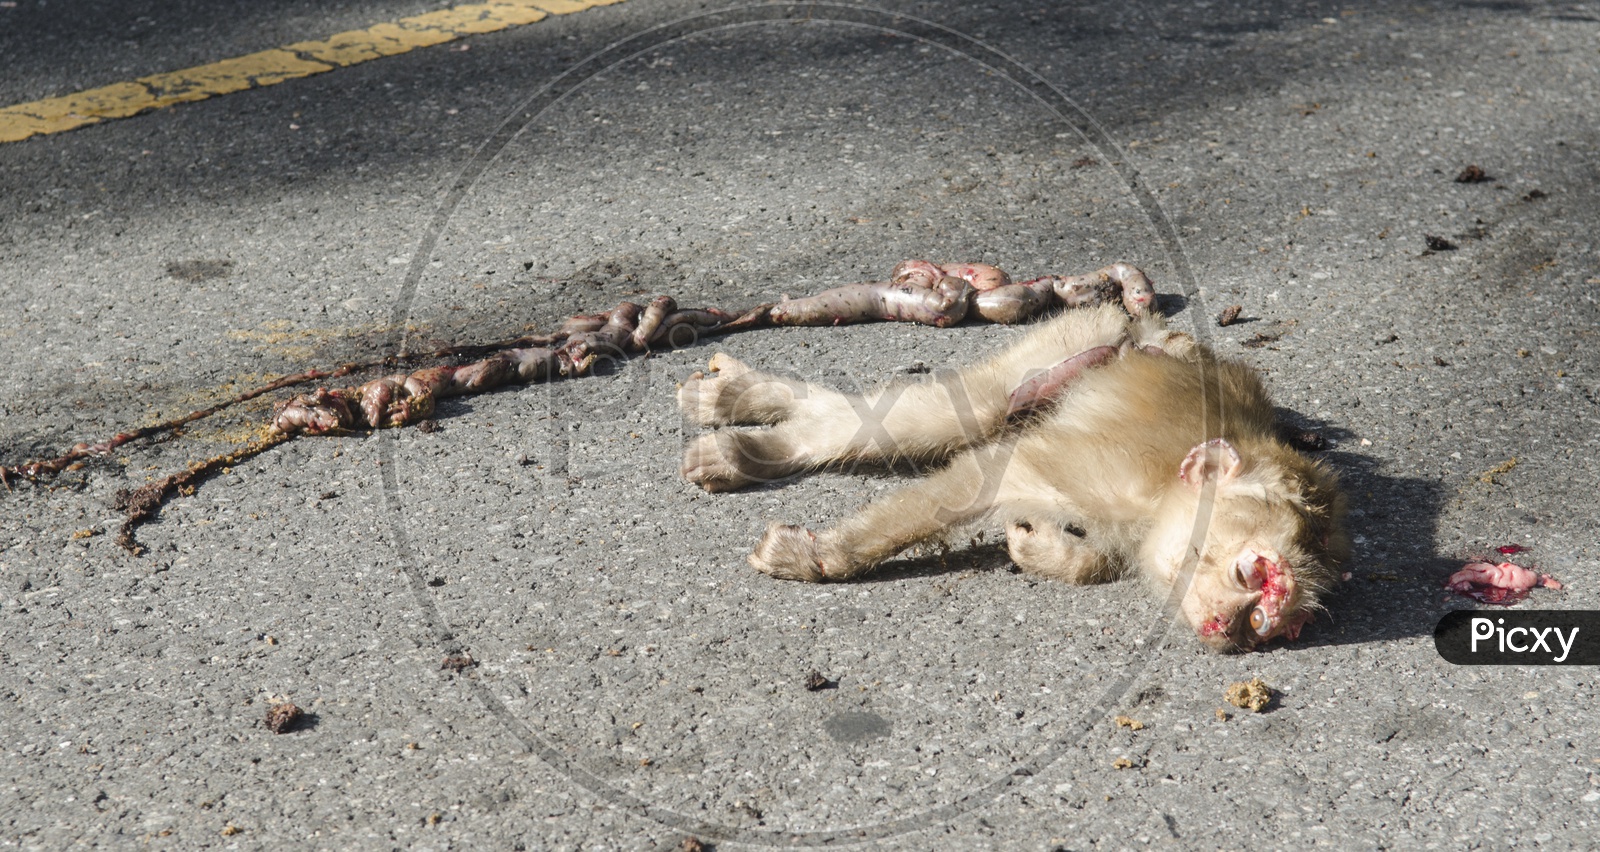 A Monkey met with an accident in Thailand